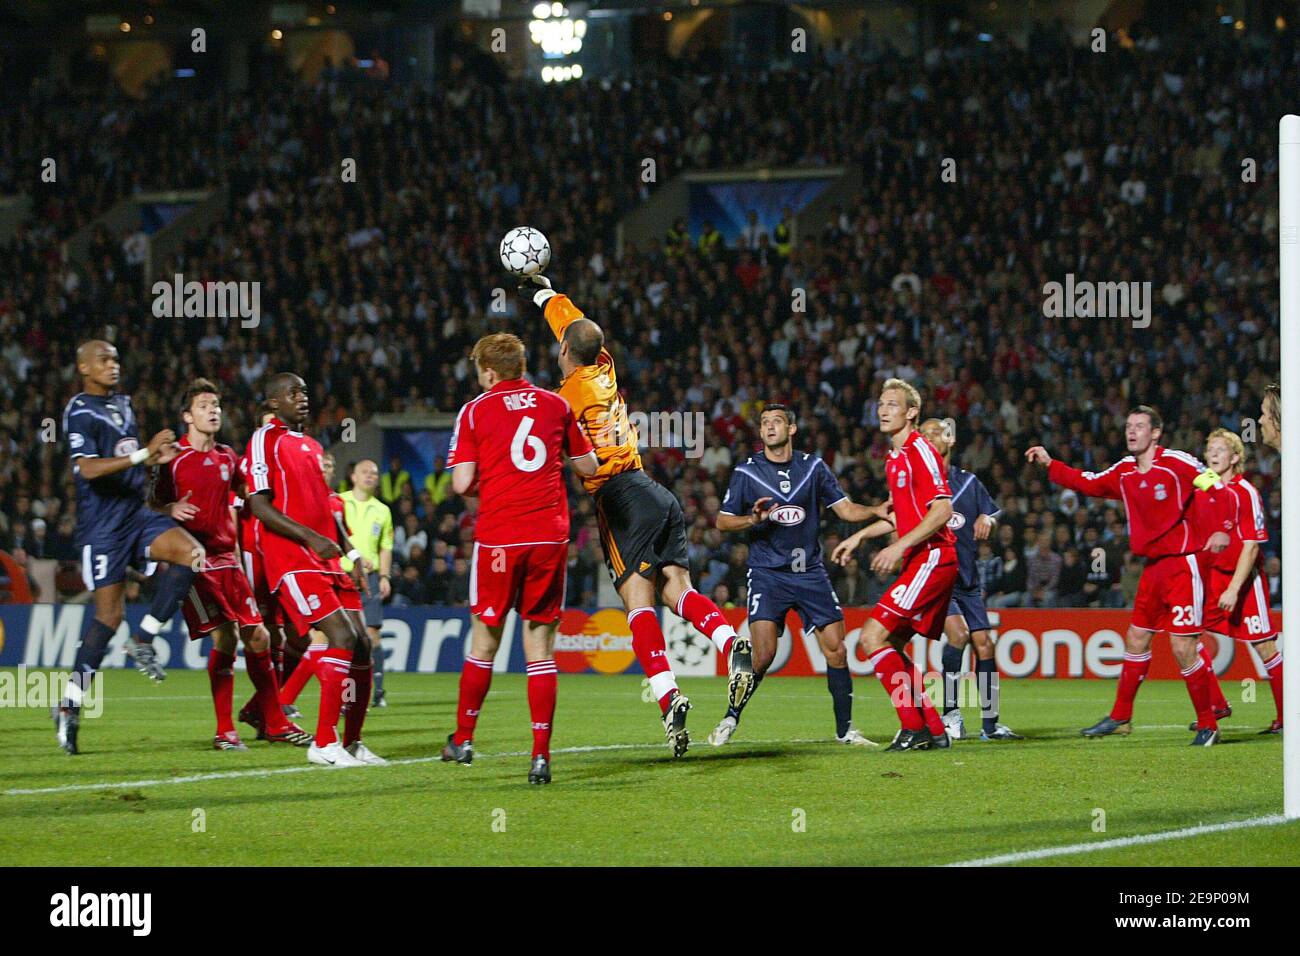 Liverpool's goalkeeper Pepe Reina during the Champions League group C match, FC Girondins De Bordeaux vs Liverpool FC, at Chaban-Delmas Stadium in Bordeaux, France, on October 18, 2006. Liverpool won 1-0. Photo by Manuel Blondeau/Cameleon/ABACAPRESS.COM. Stock Photo